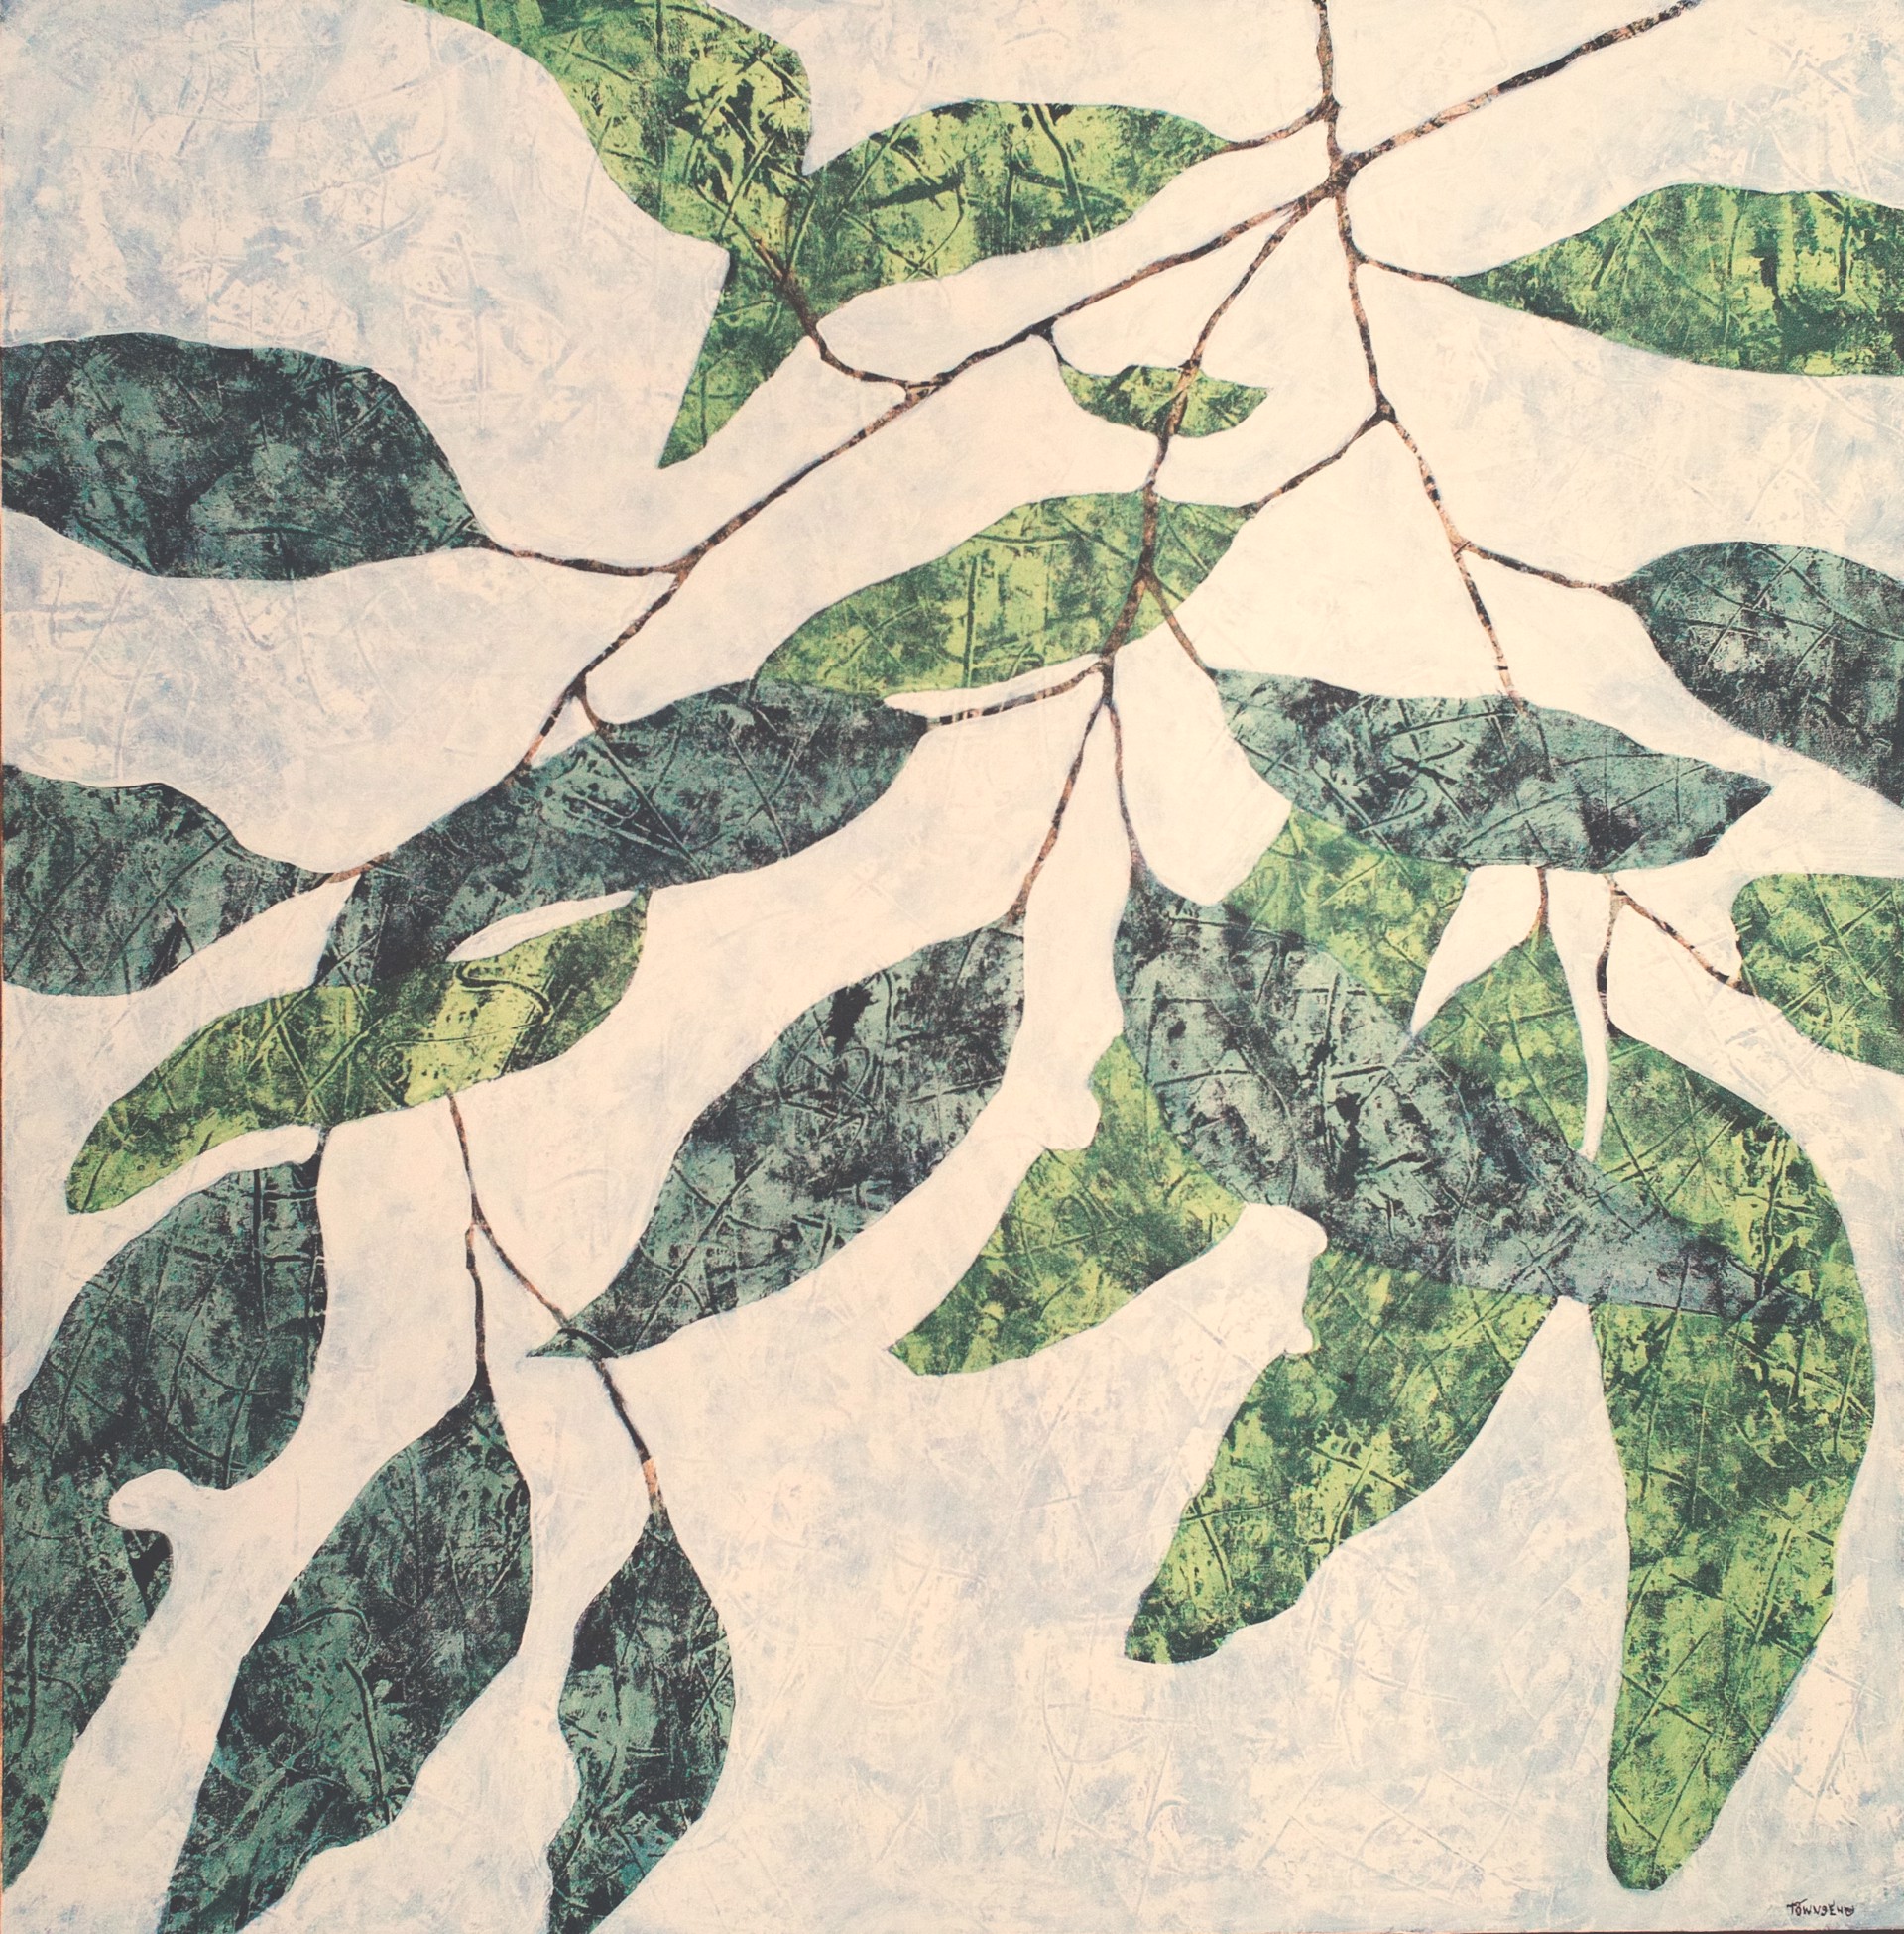 Leafy Composition 11 by John Townsend